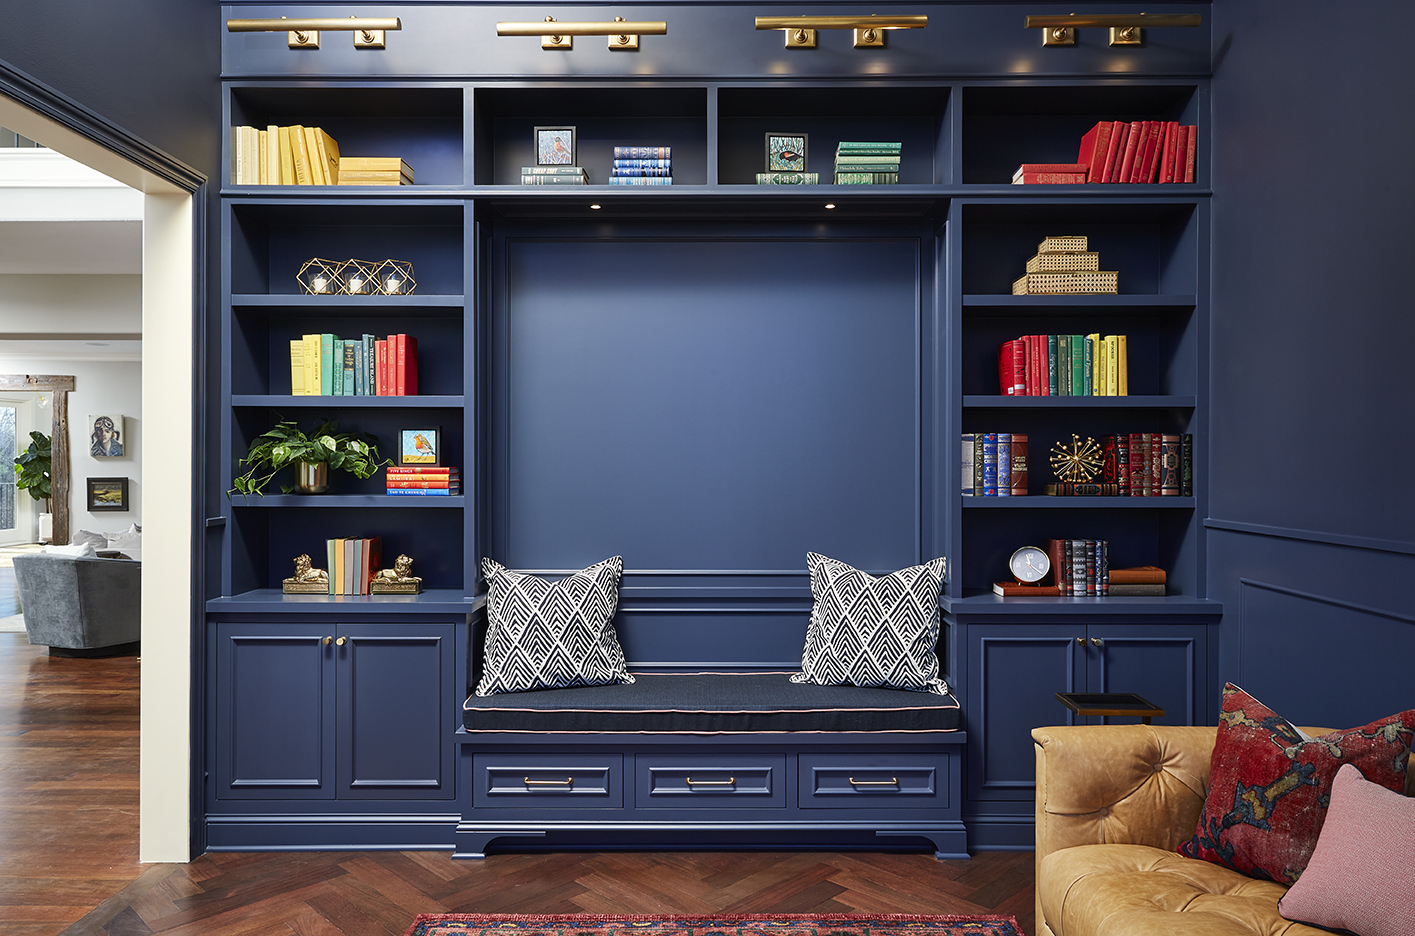 Library room with dark blue shelving filled with a rainbow of books, a brown leather couch sitting next to the shelves, and a custom piece of art on the wall